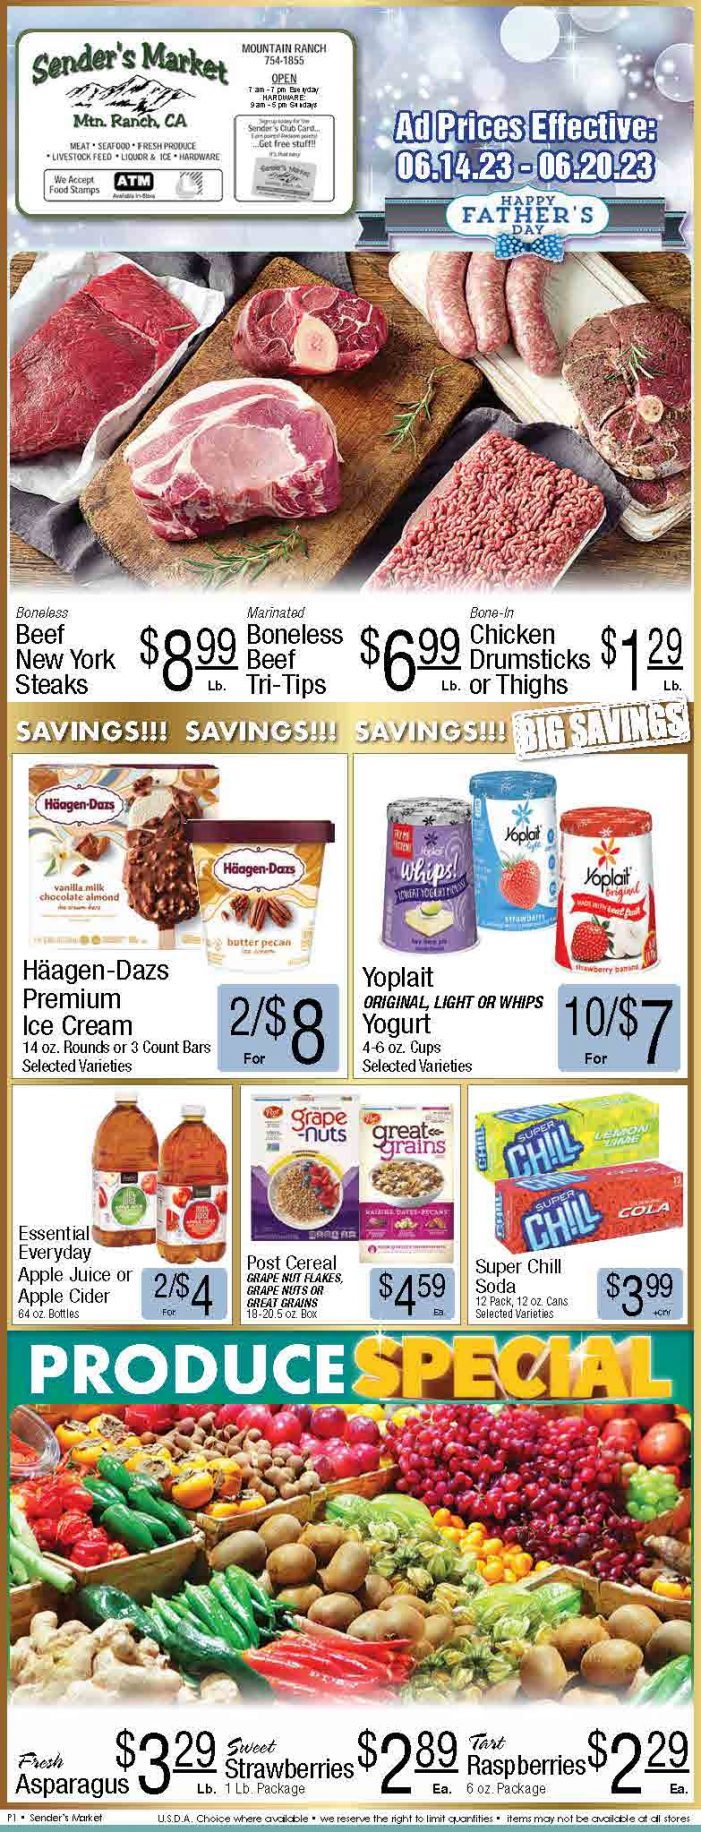 Sender’s Market Weekly Ad & Grocery Specials Through June 20th! Shop Local & Save!!